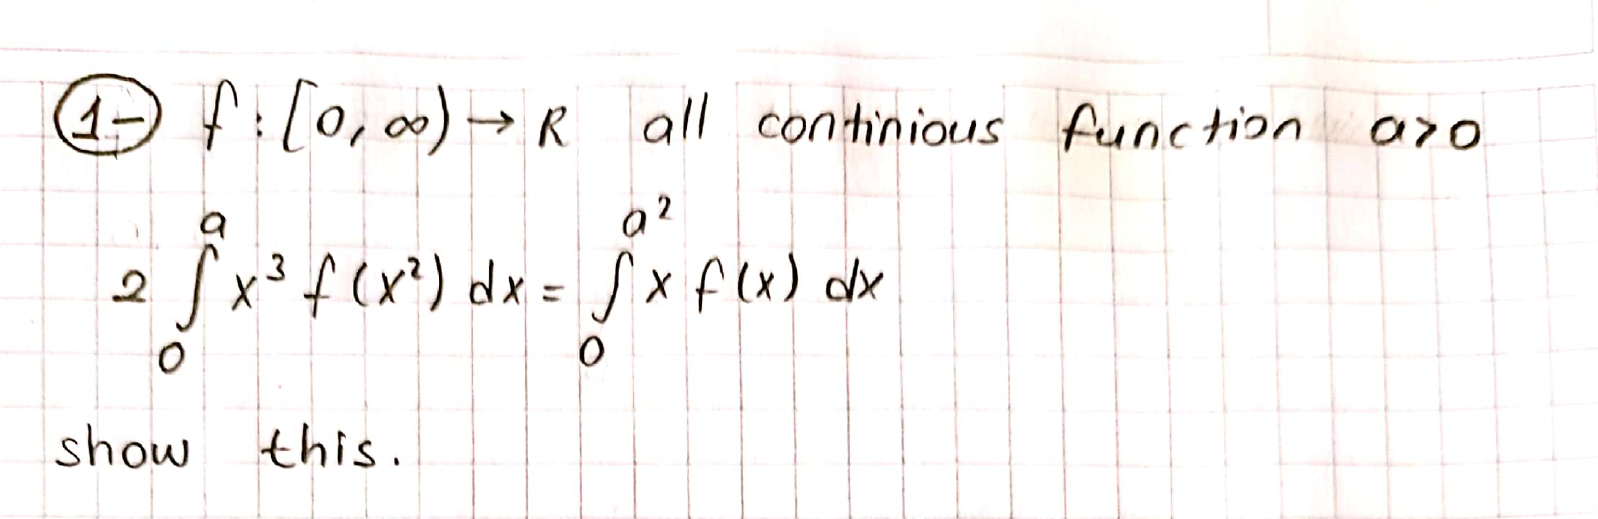 O fi[0,00)→R all continious Aunction
aro
Sx³f(x') dx = Sx f(x) abx
%3D
show this.
